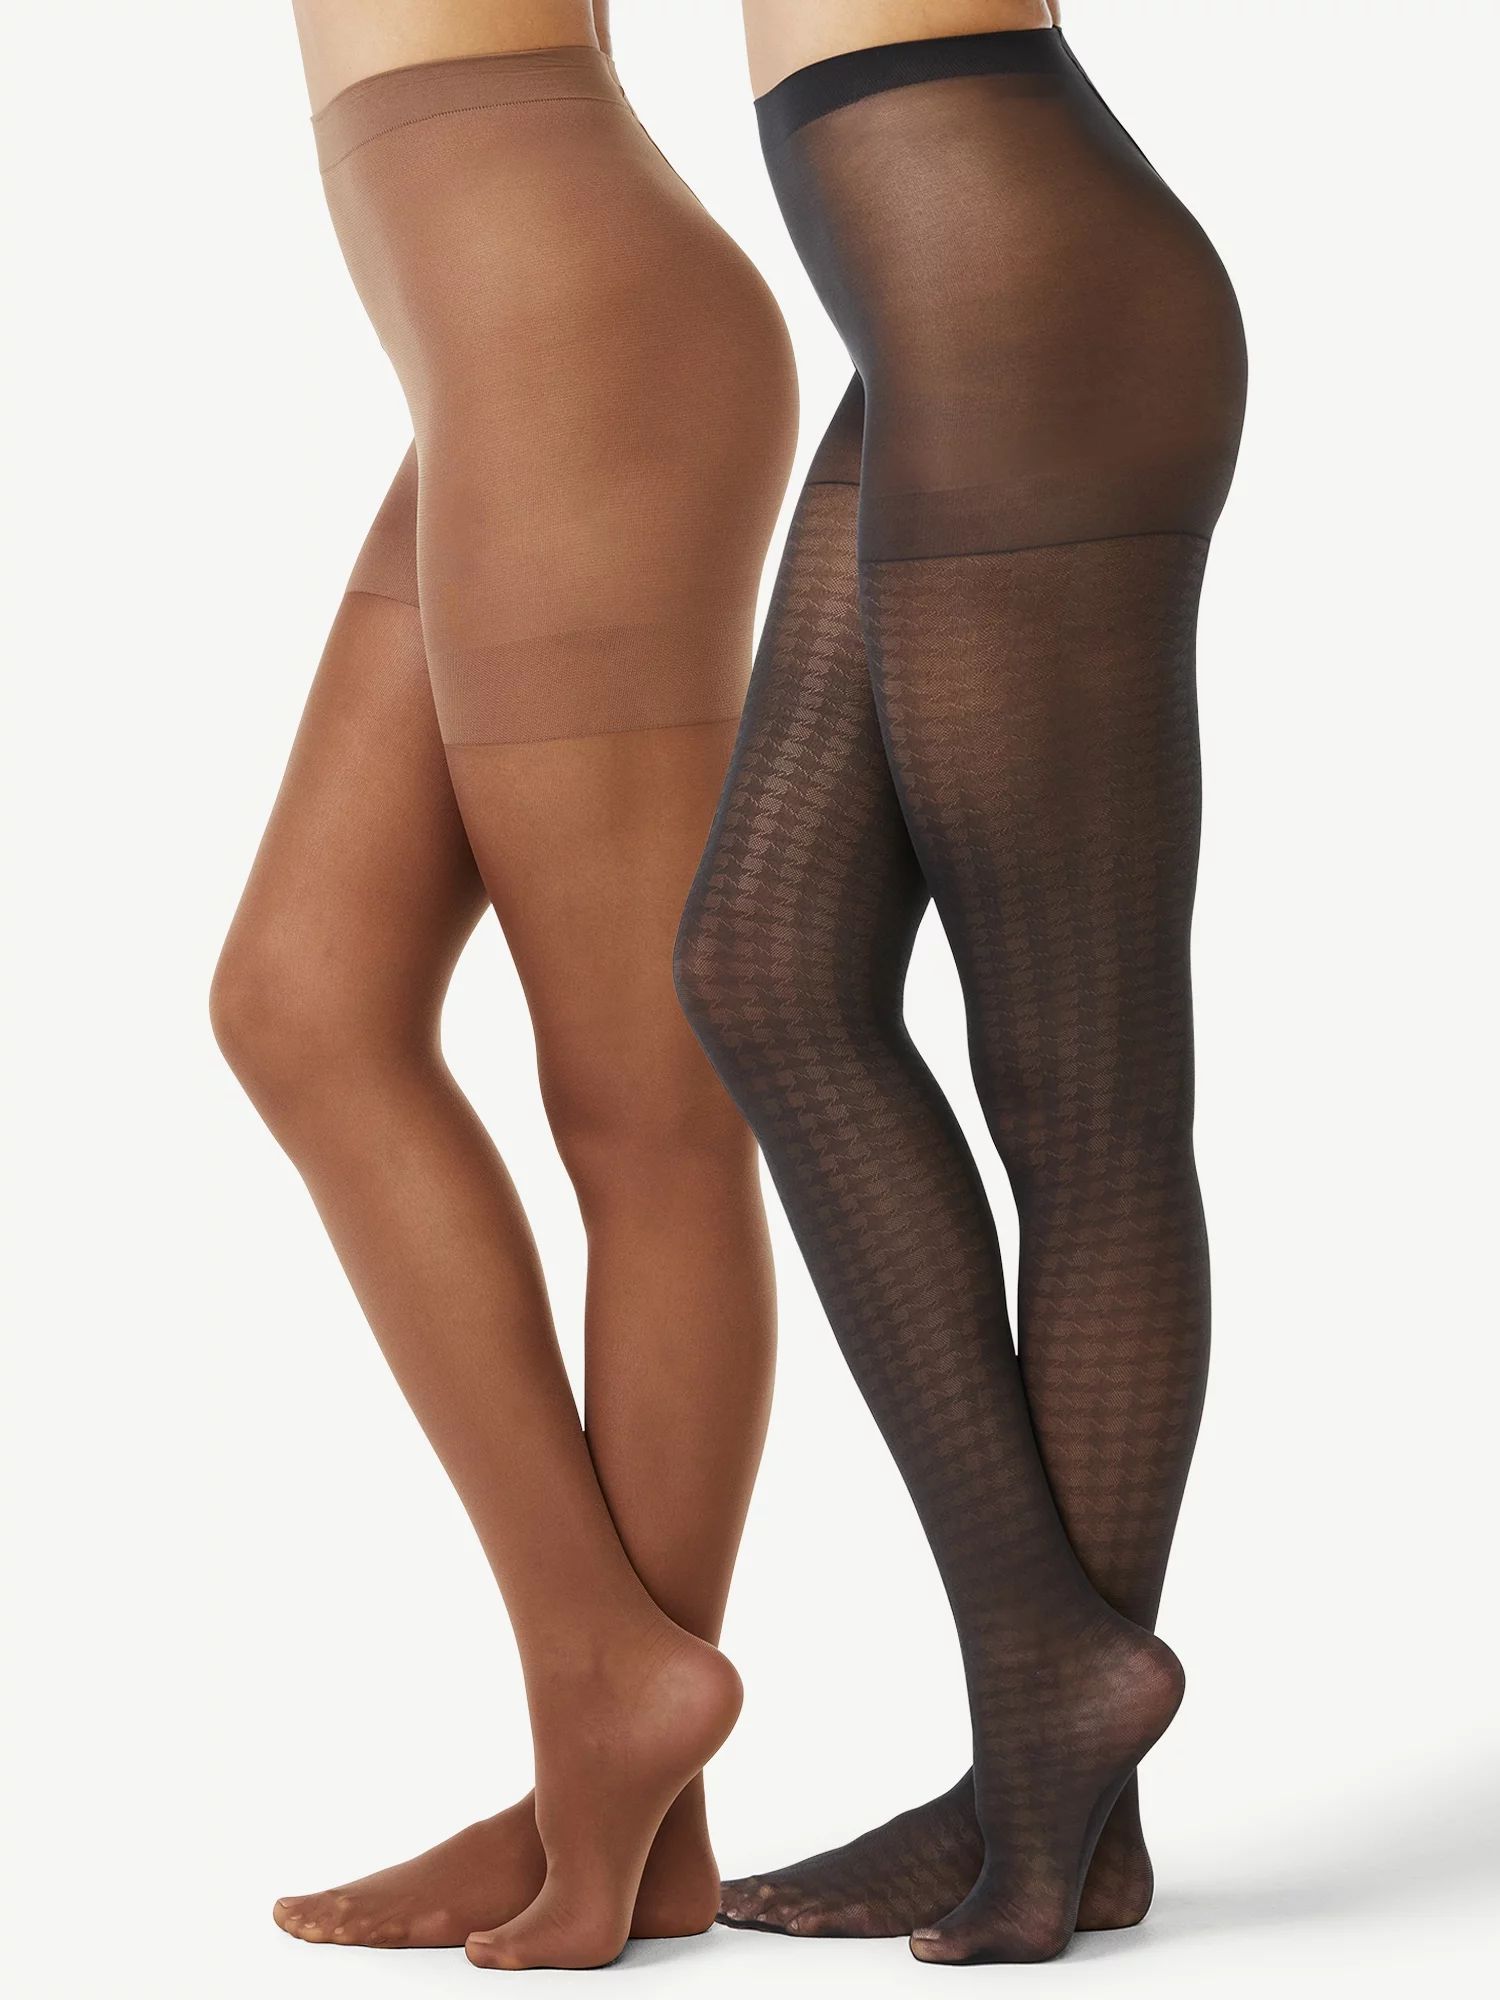 Joyspun Women's Houndstooth and Opaque Tights, 2-Pack, Sizes S to 2XL | Walmart (US)